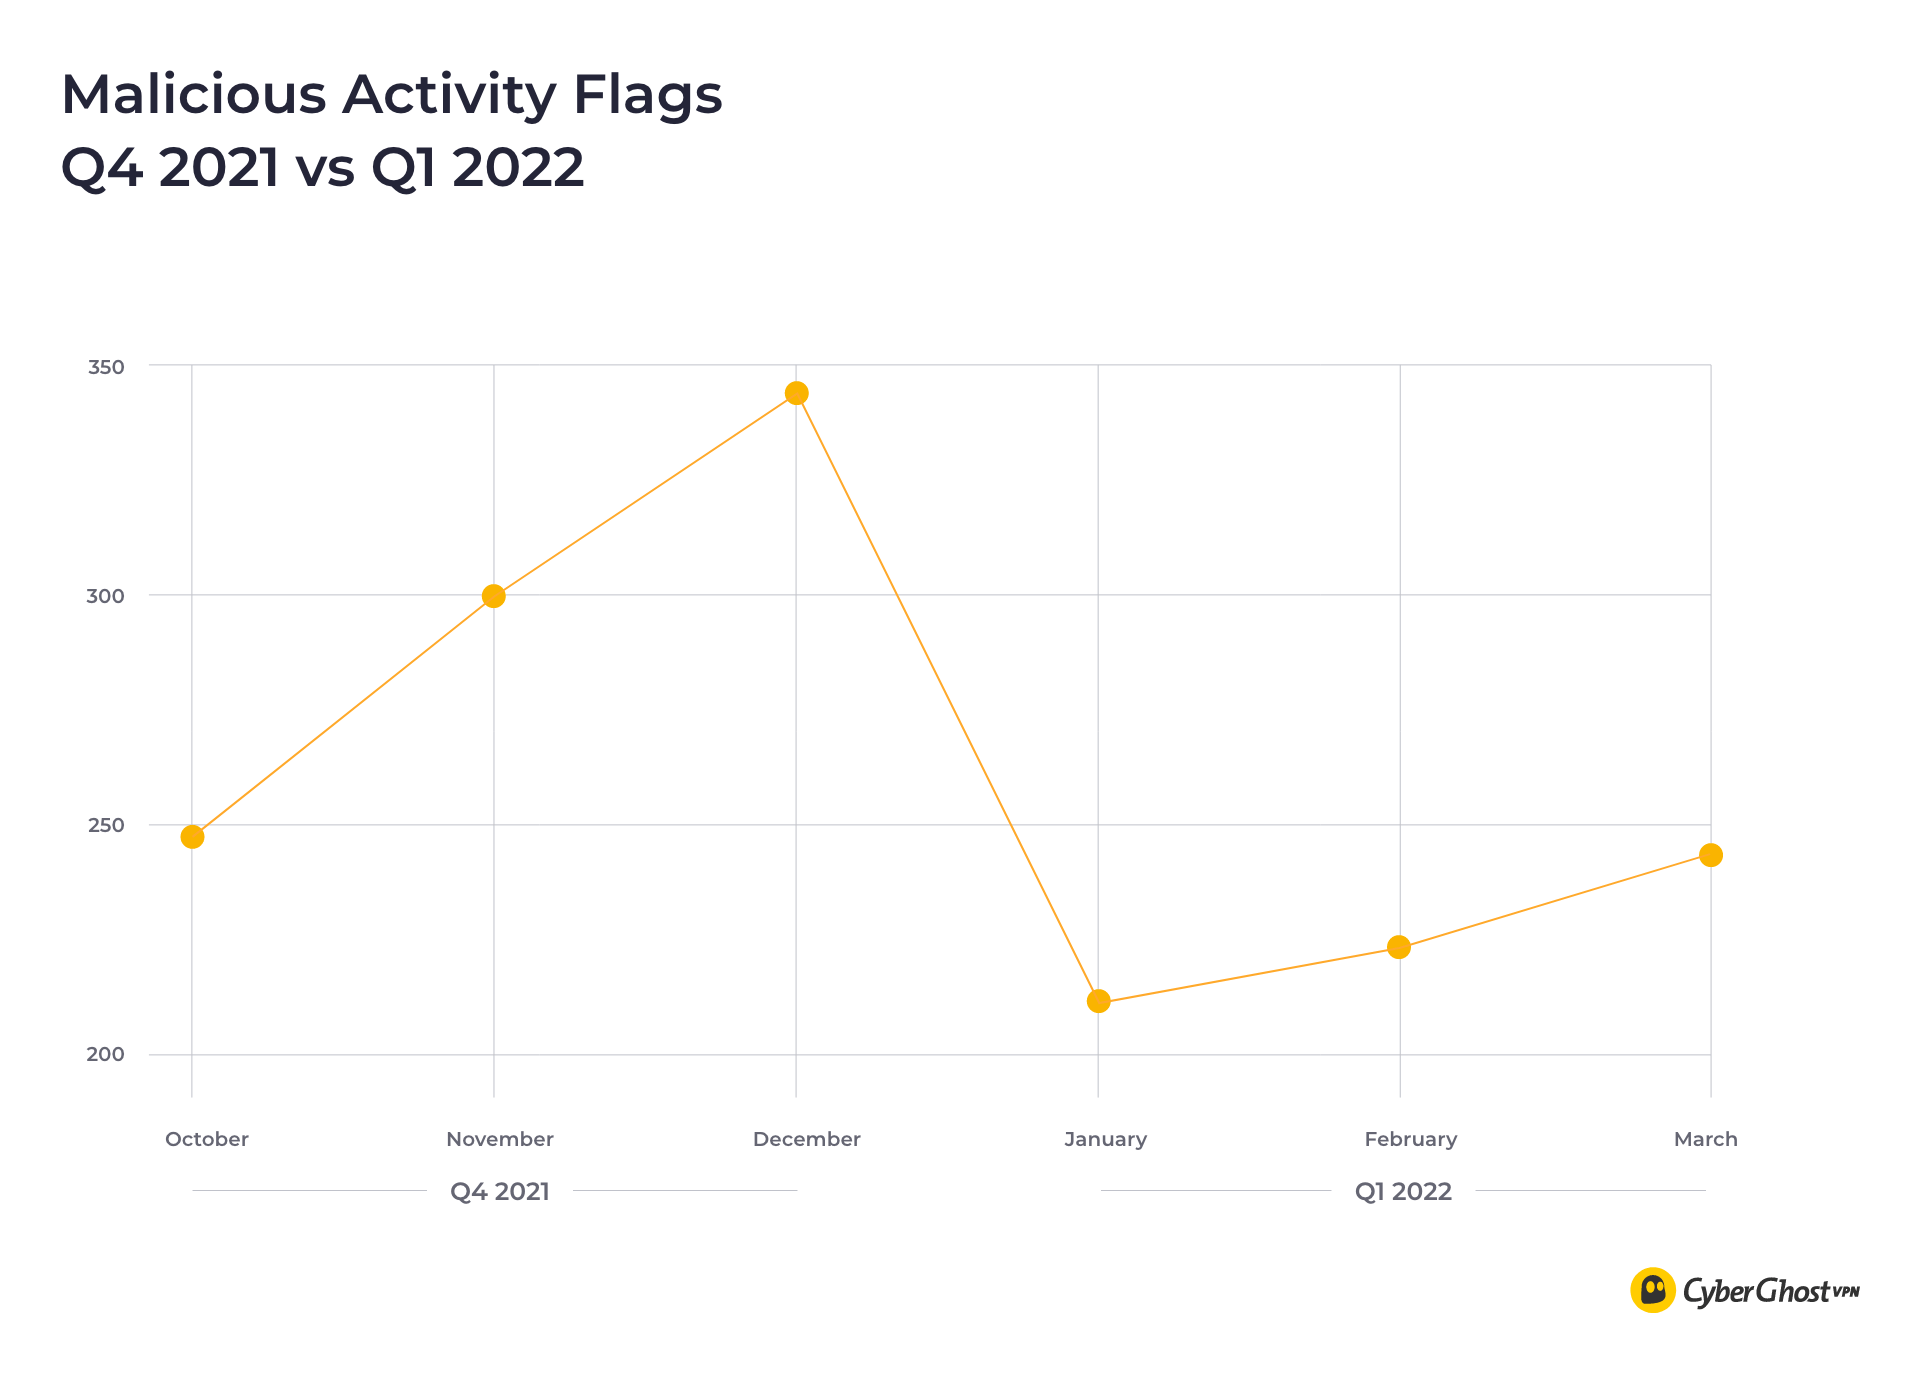 Chart showing malicious activity flags in the first quarter of 2022.